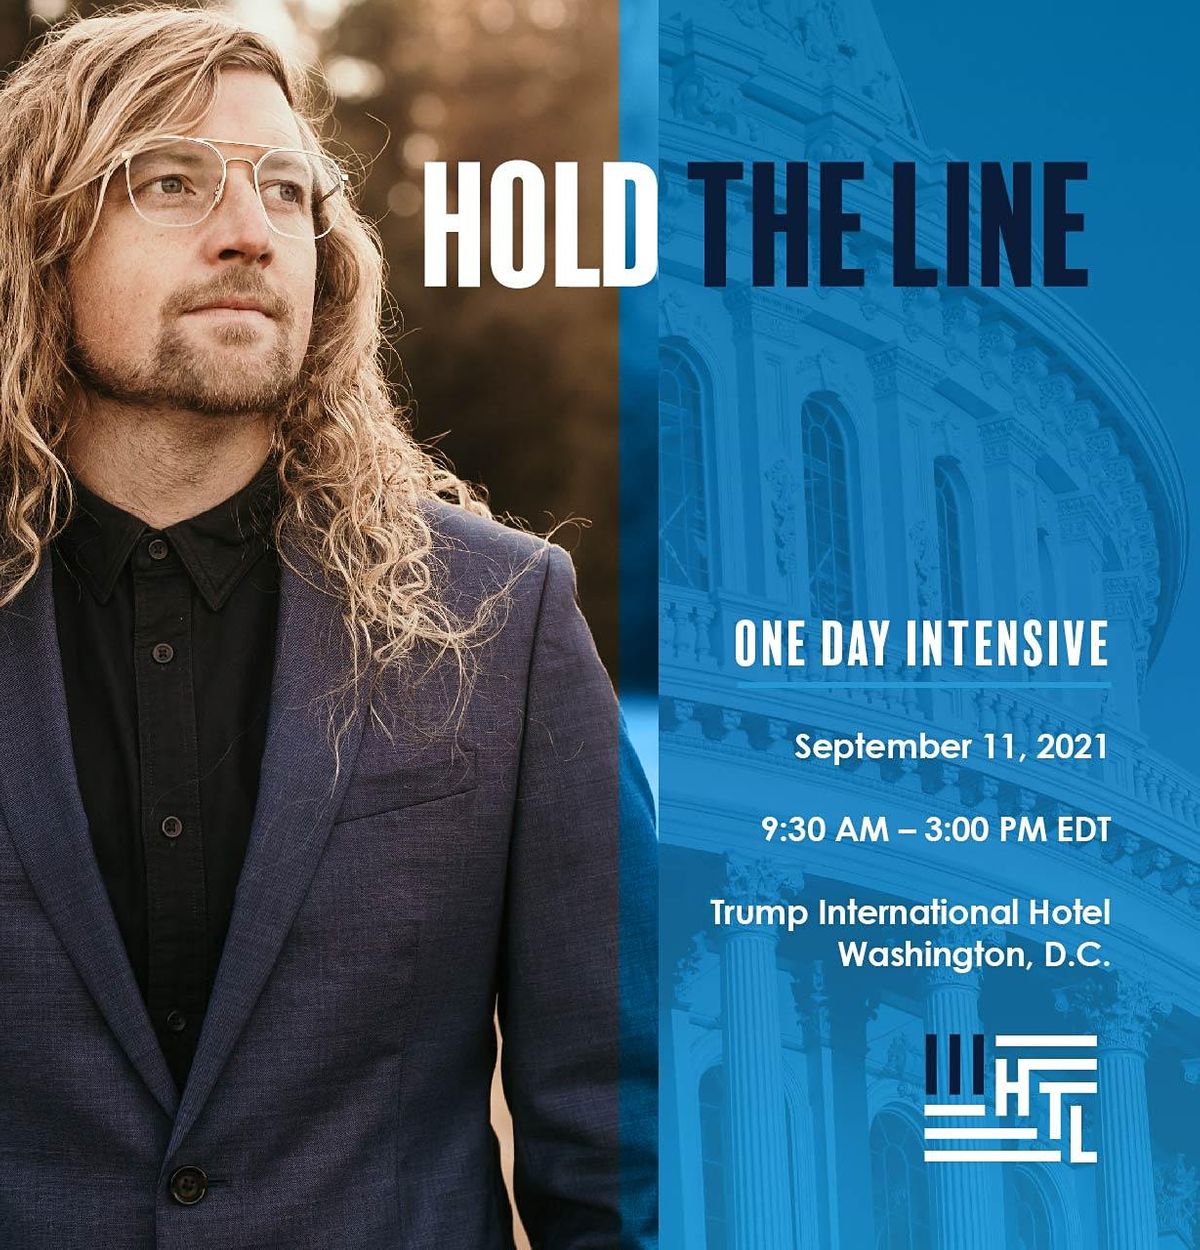 HOLD THE LINE - One Day Intensive